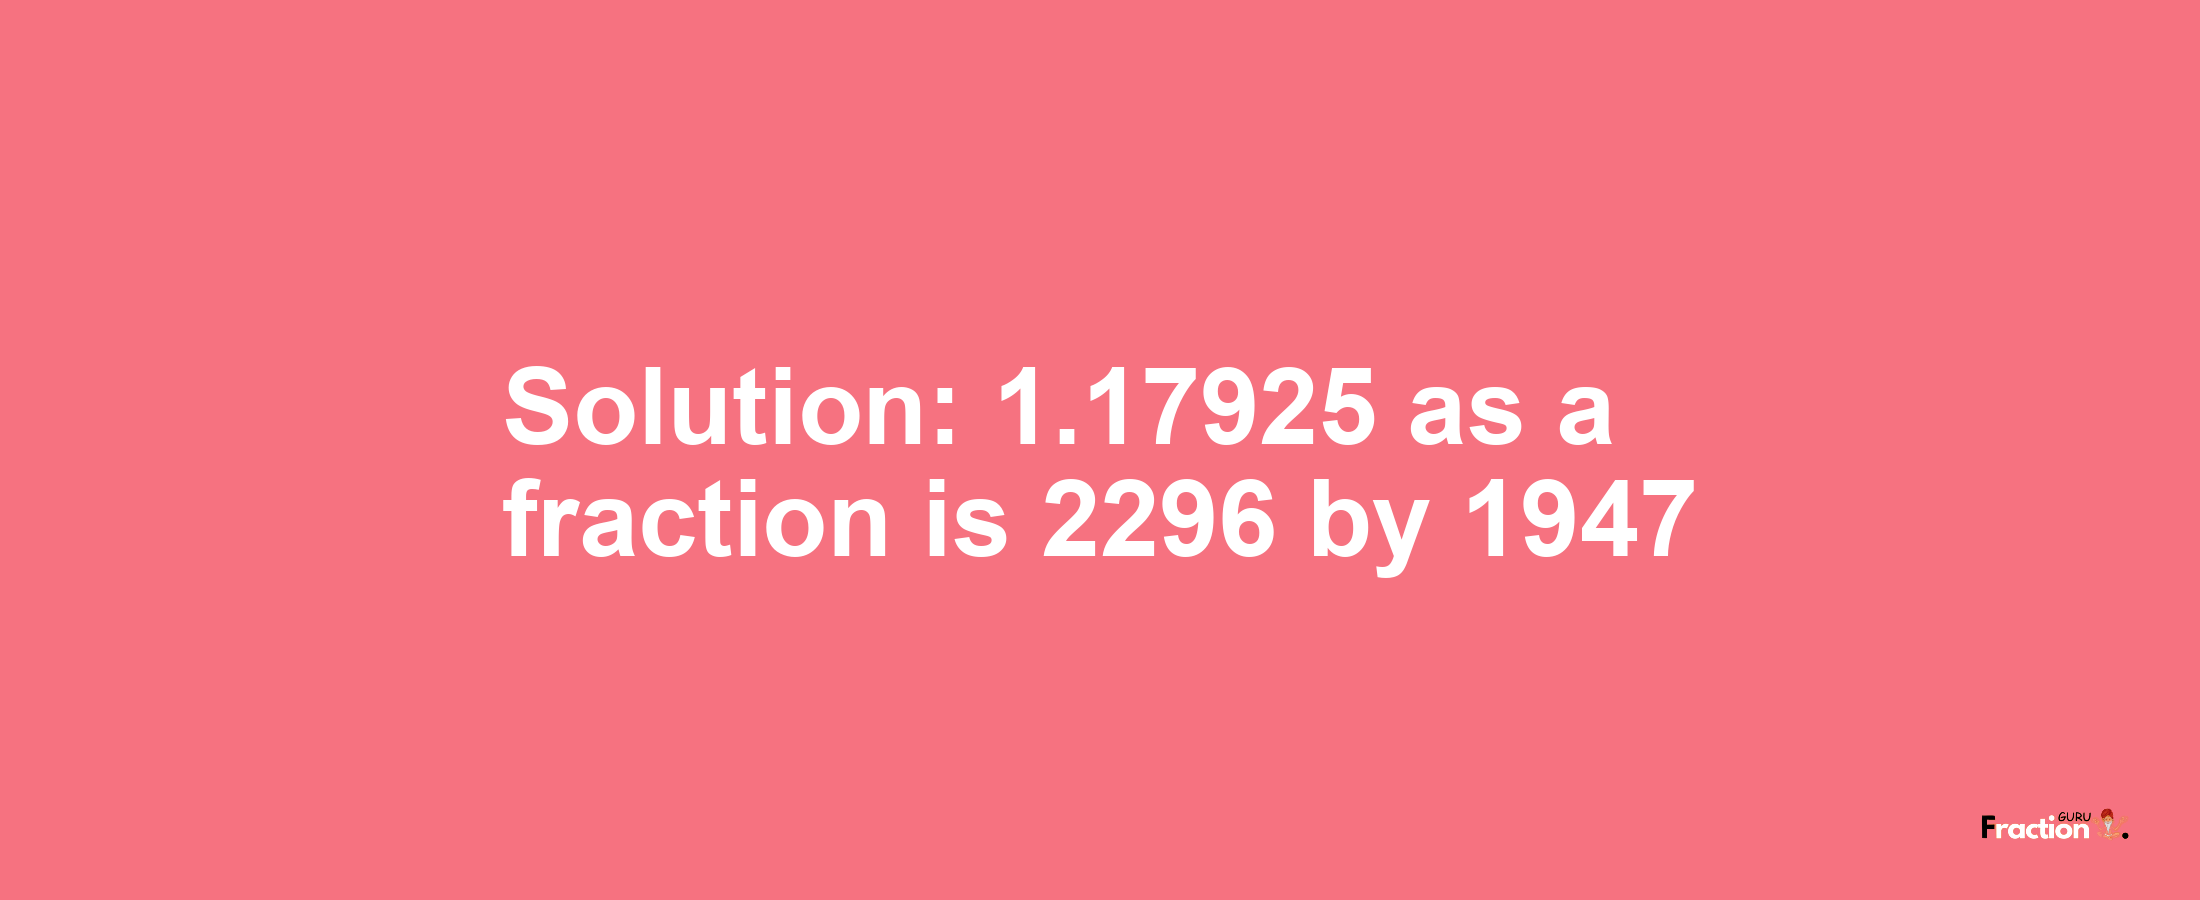 Solution:1.17925 as a fraction is 2296/1947